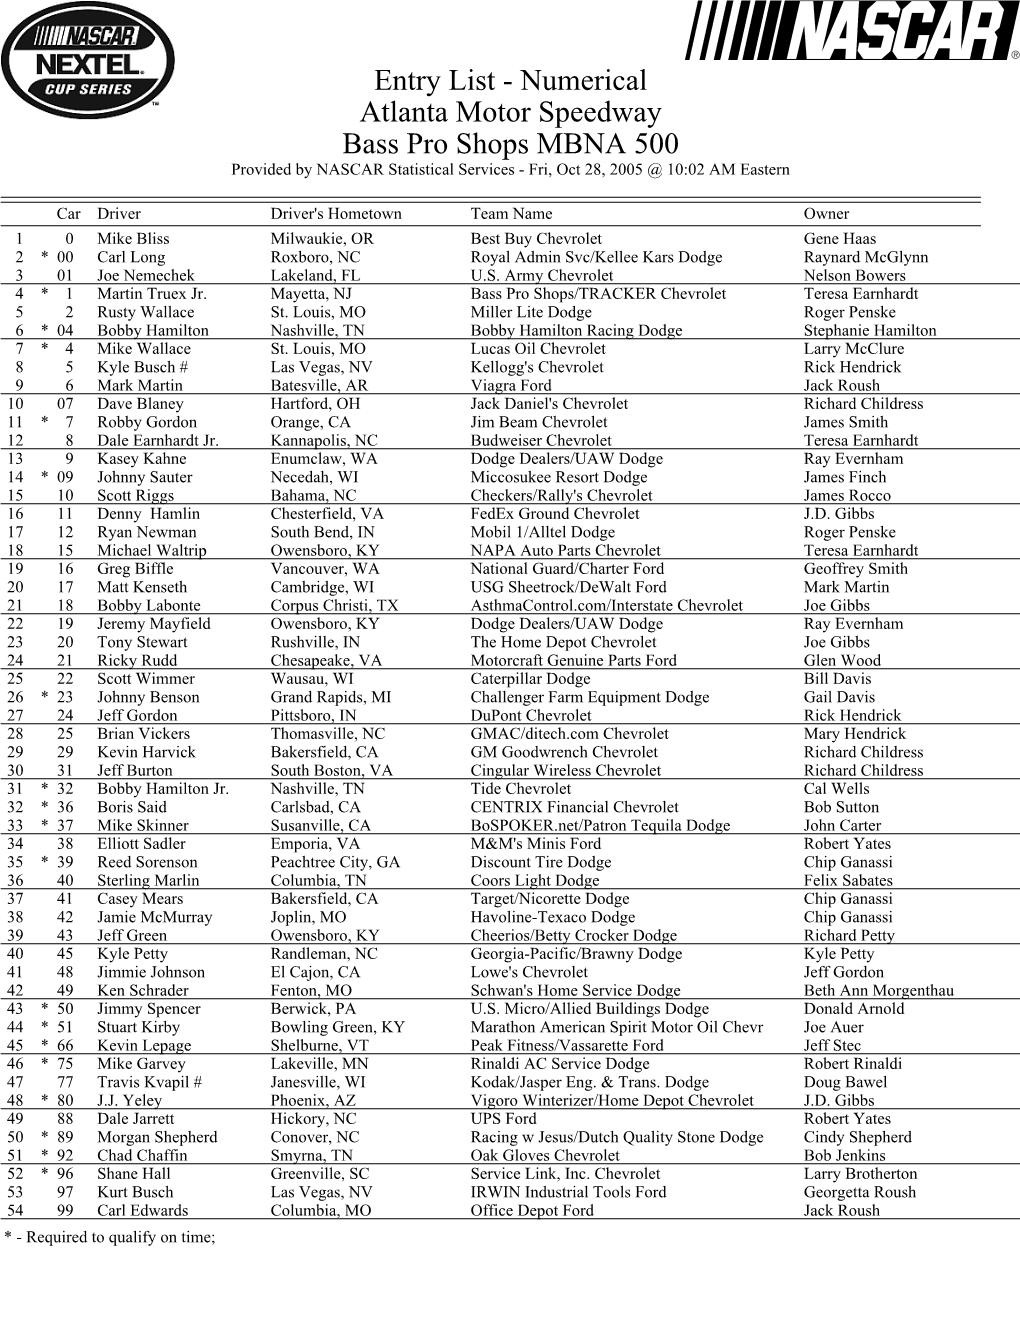 Entry List - Numerical Atlanta Motor Speedway Bass Pro Shops MBNA 500 Provided by NASCAR Statistical Services - Fri, Oct 28, 2005 @ 10:02 AM Eastern